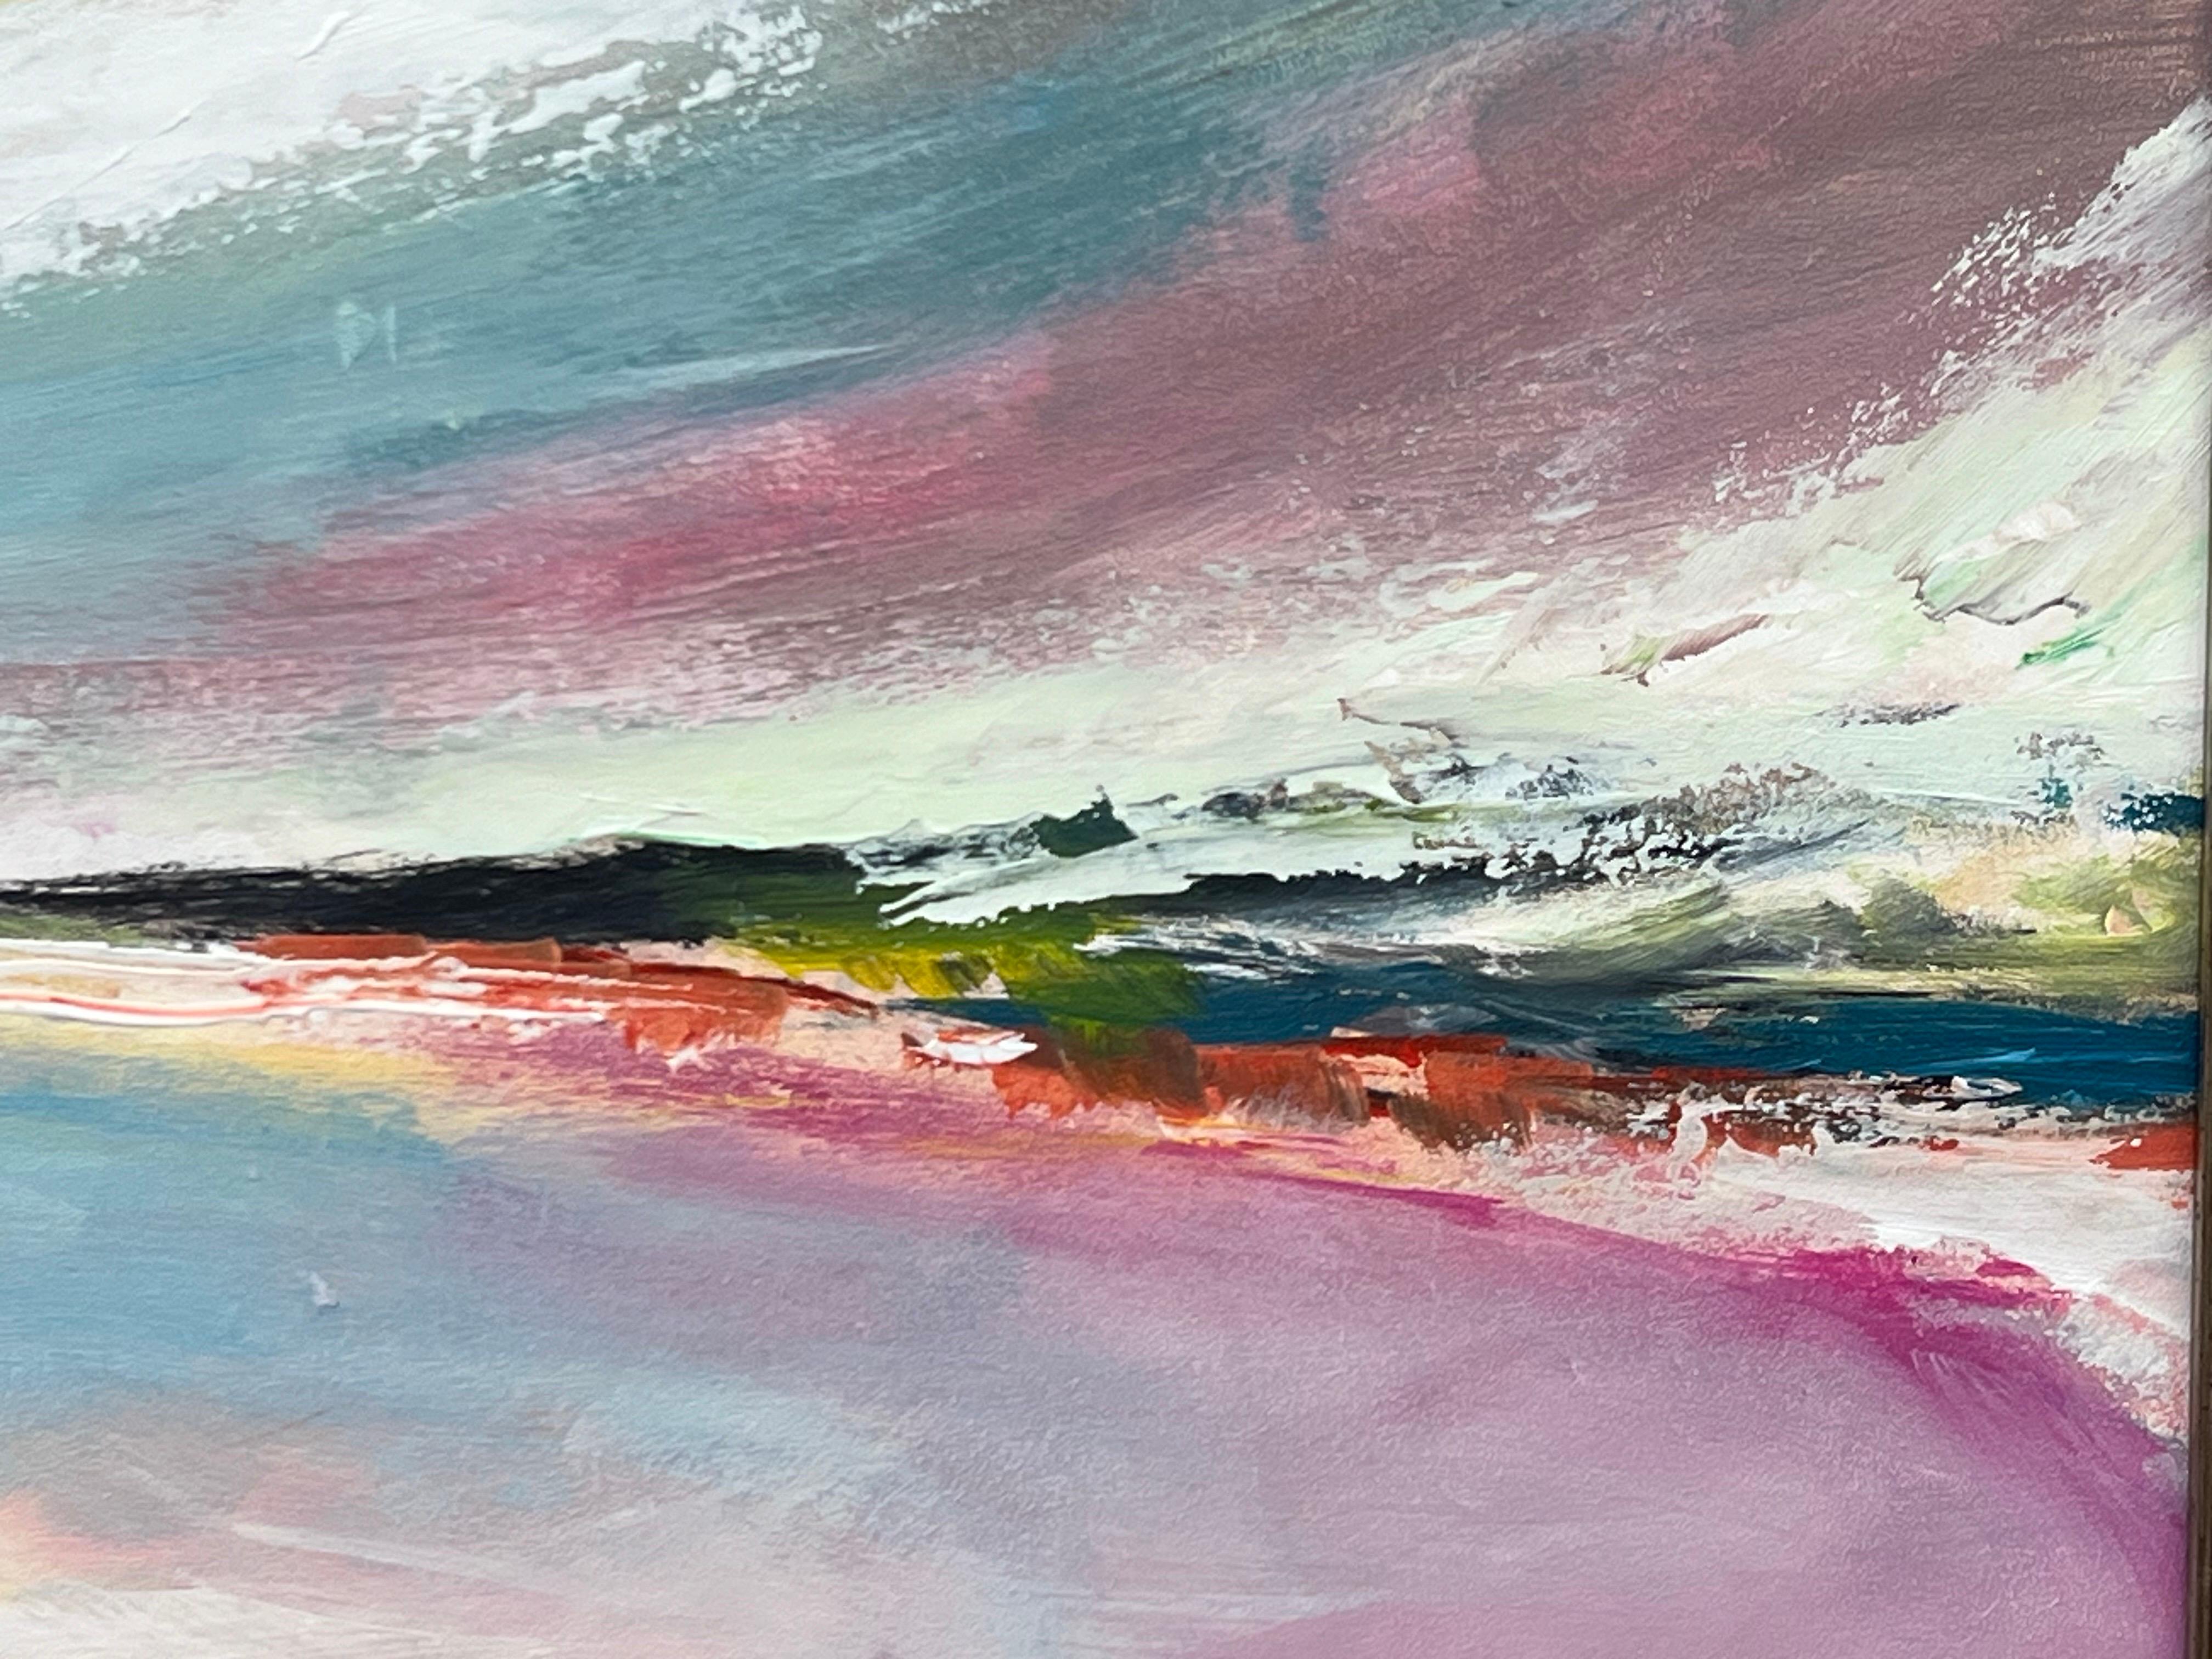 Abstract Landscape Seascape Art with Pink Blue & White Sky by British Artist For Sale 8